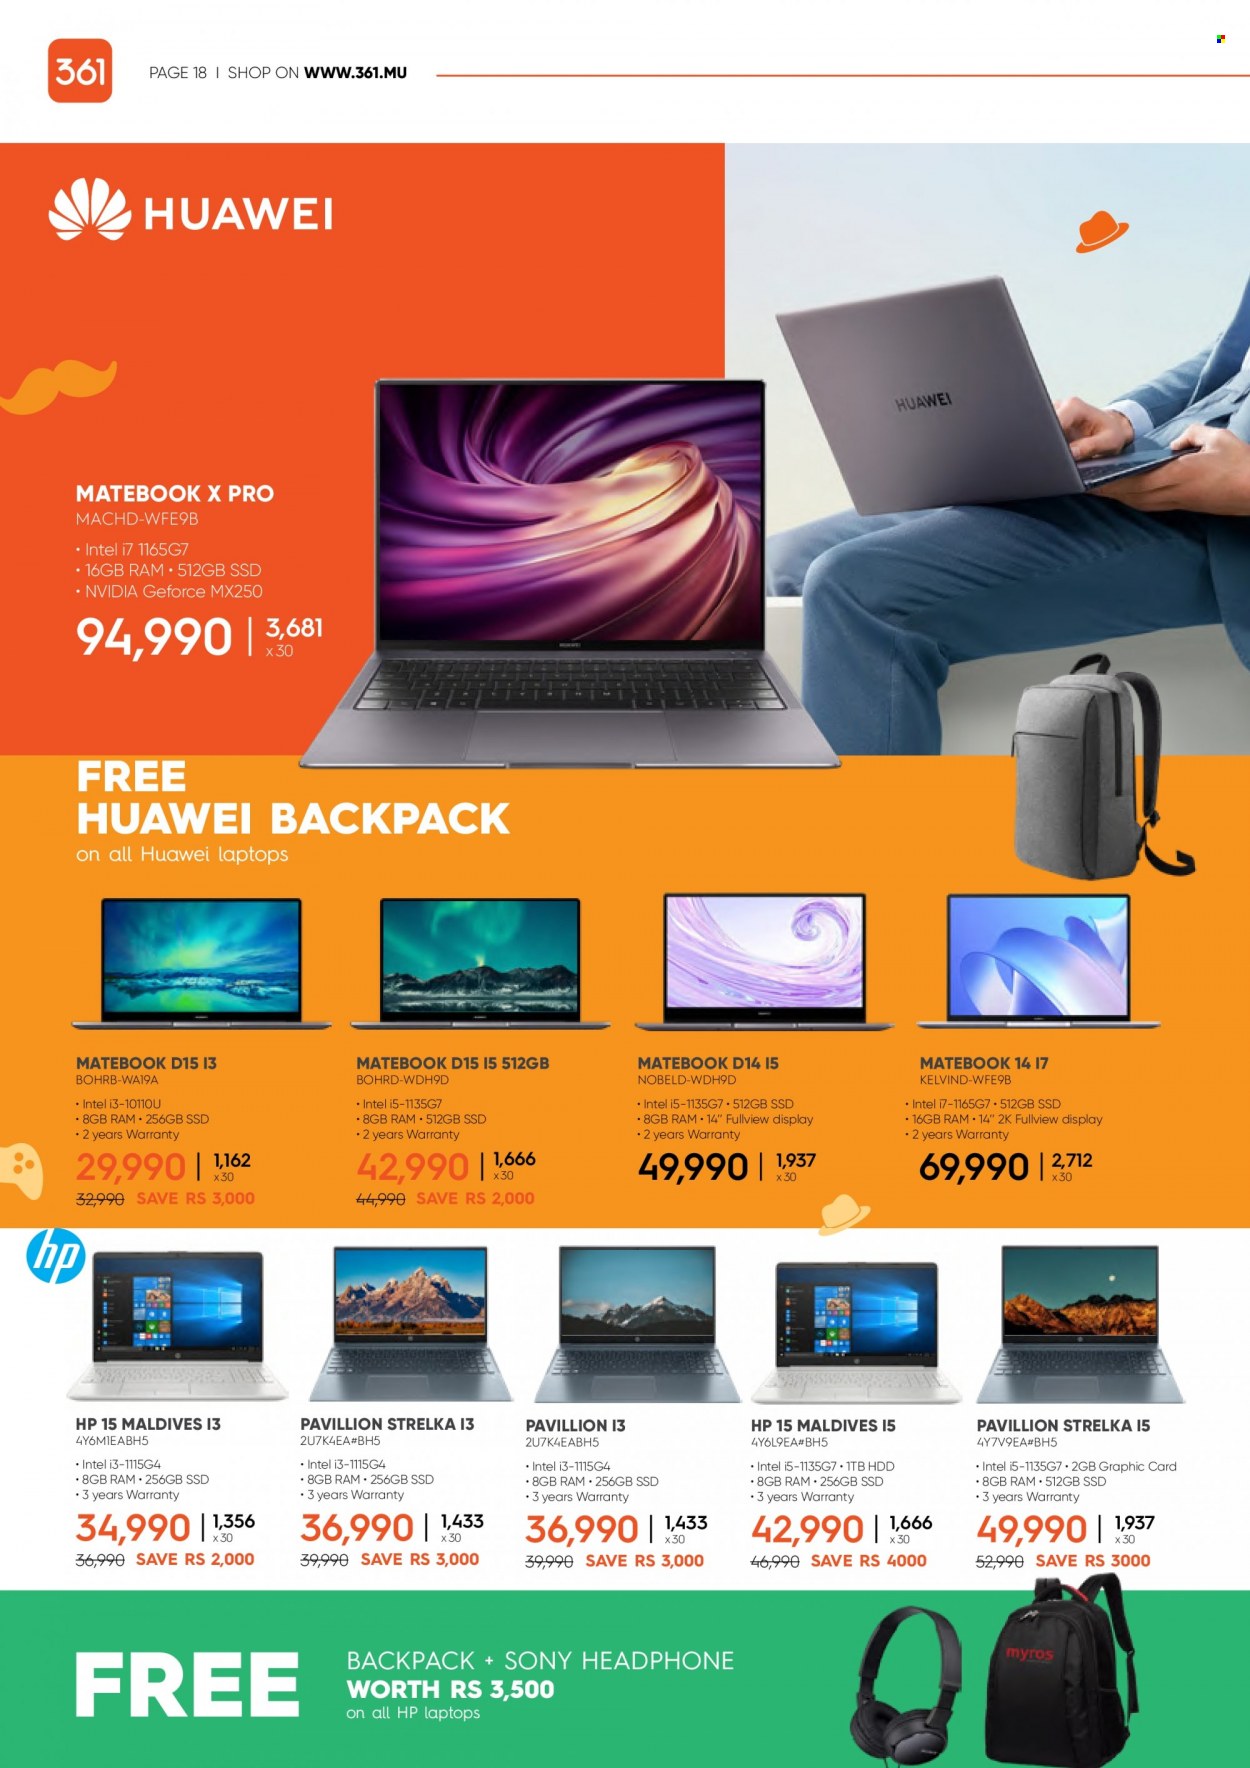 thumbnail - 361 Catalogue - 14.06.2022 - 23.06.2022 - Sales products - Sony, Intel, Hewlett Packard, Huawei, laptop, MateBook, headphones. Page 18.